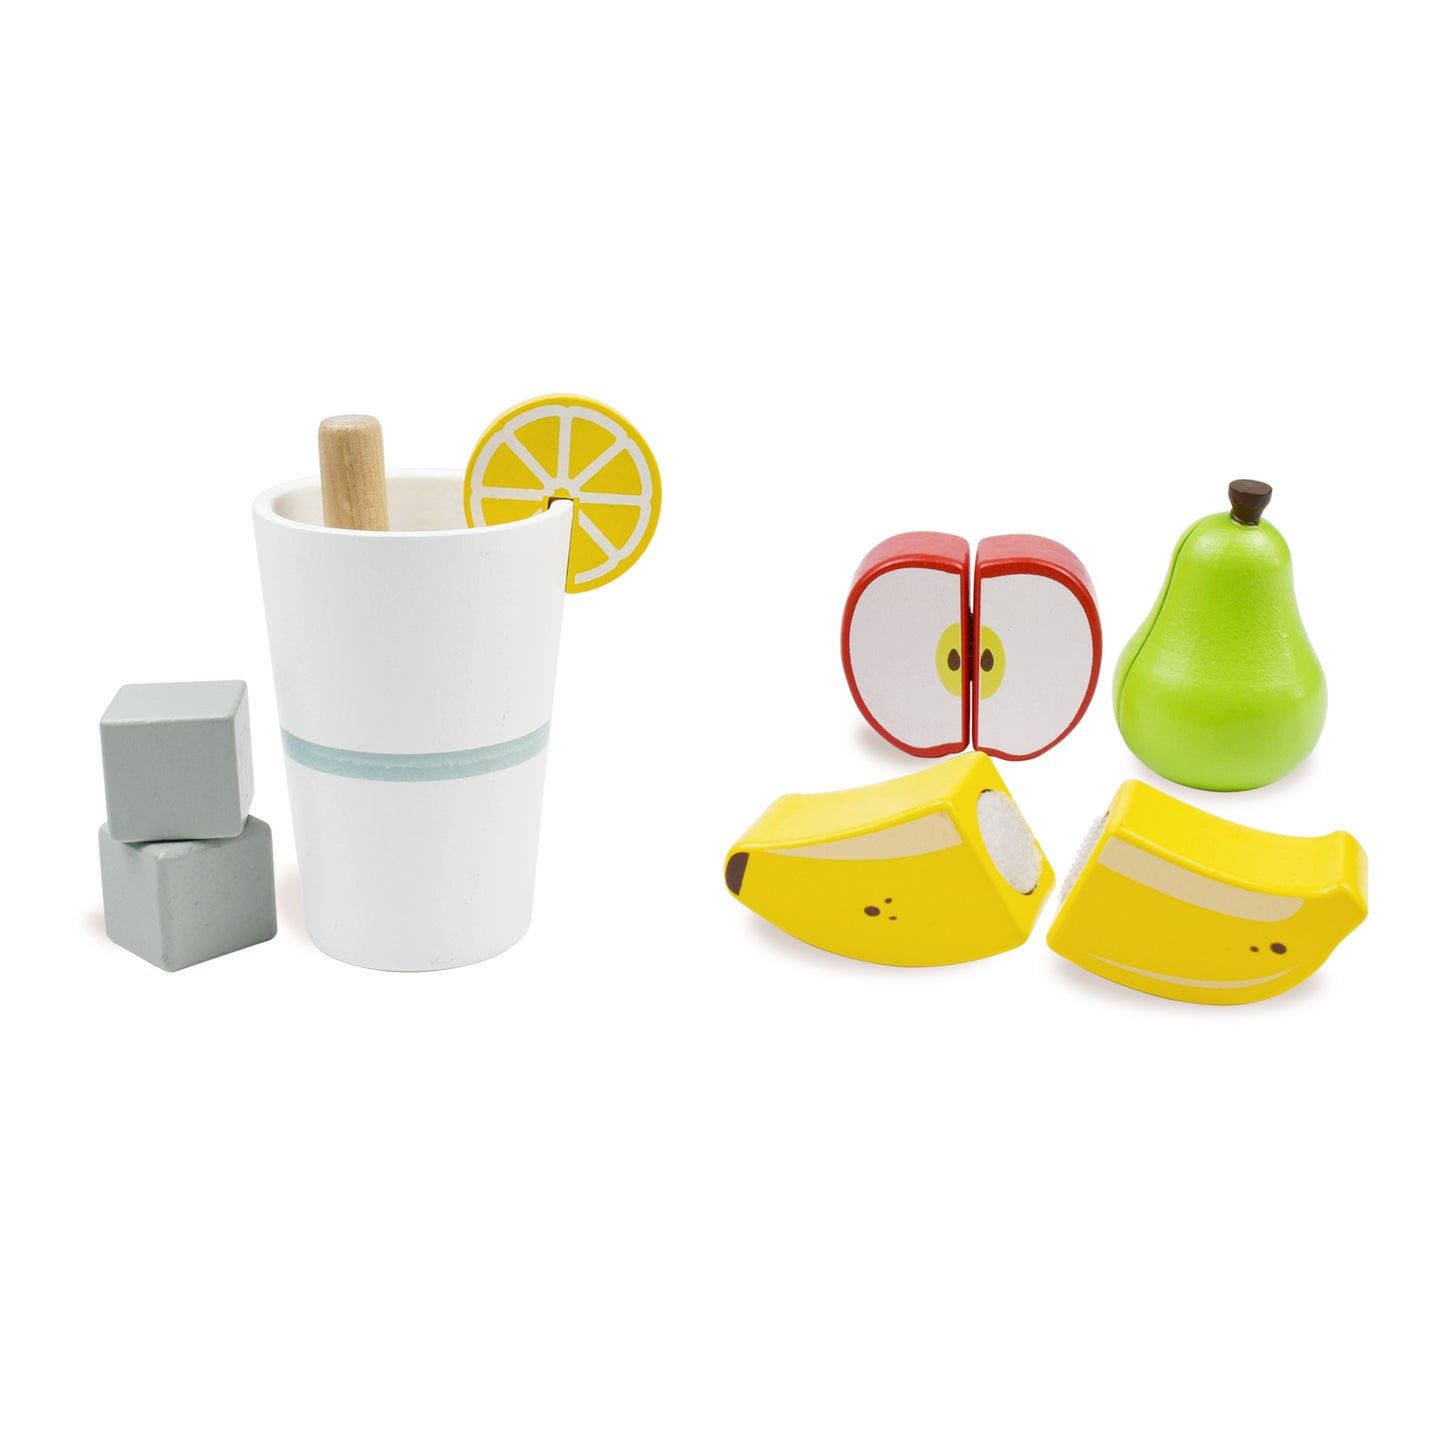 Wooden Smoothie Maker toy - Includes wood Blender, cup, Fruits and